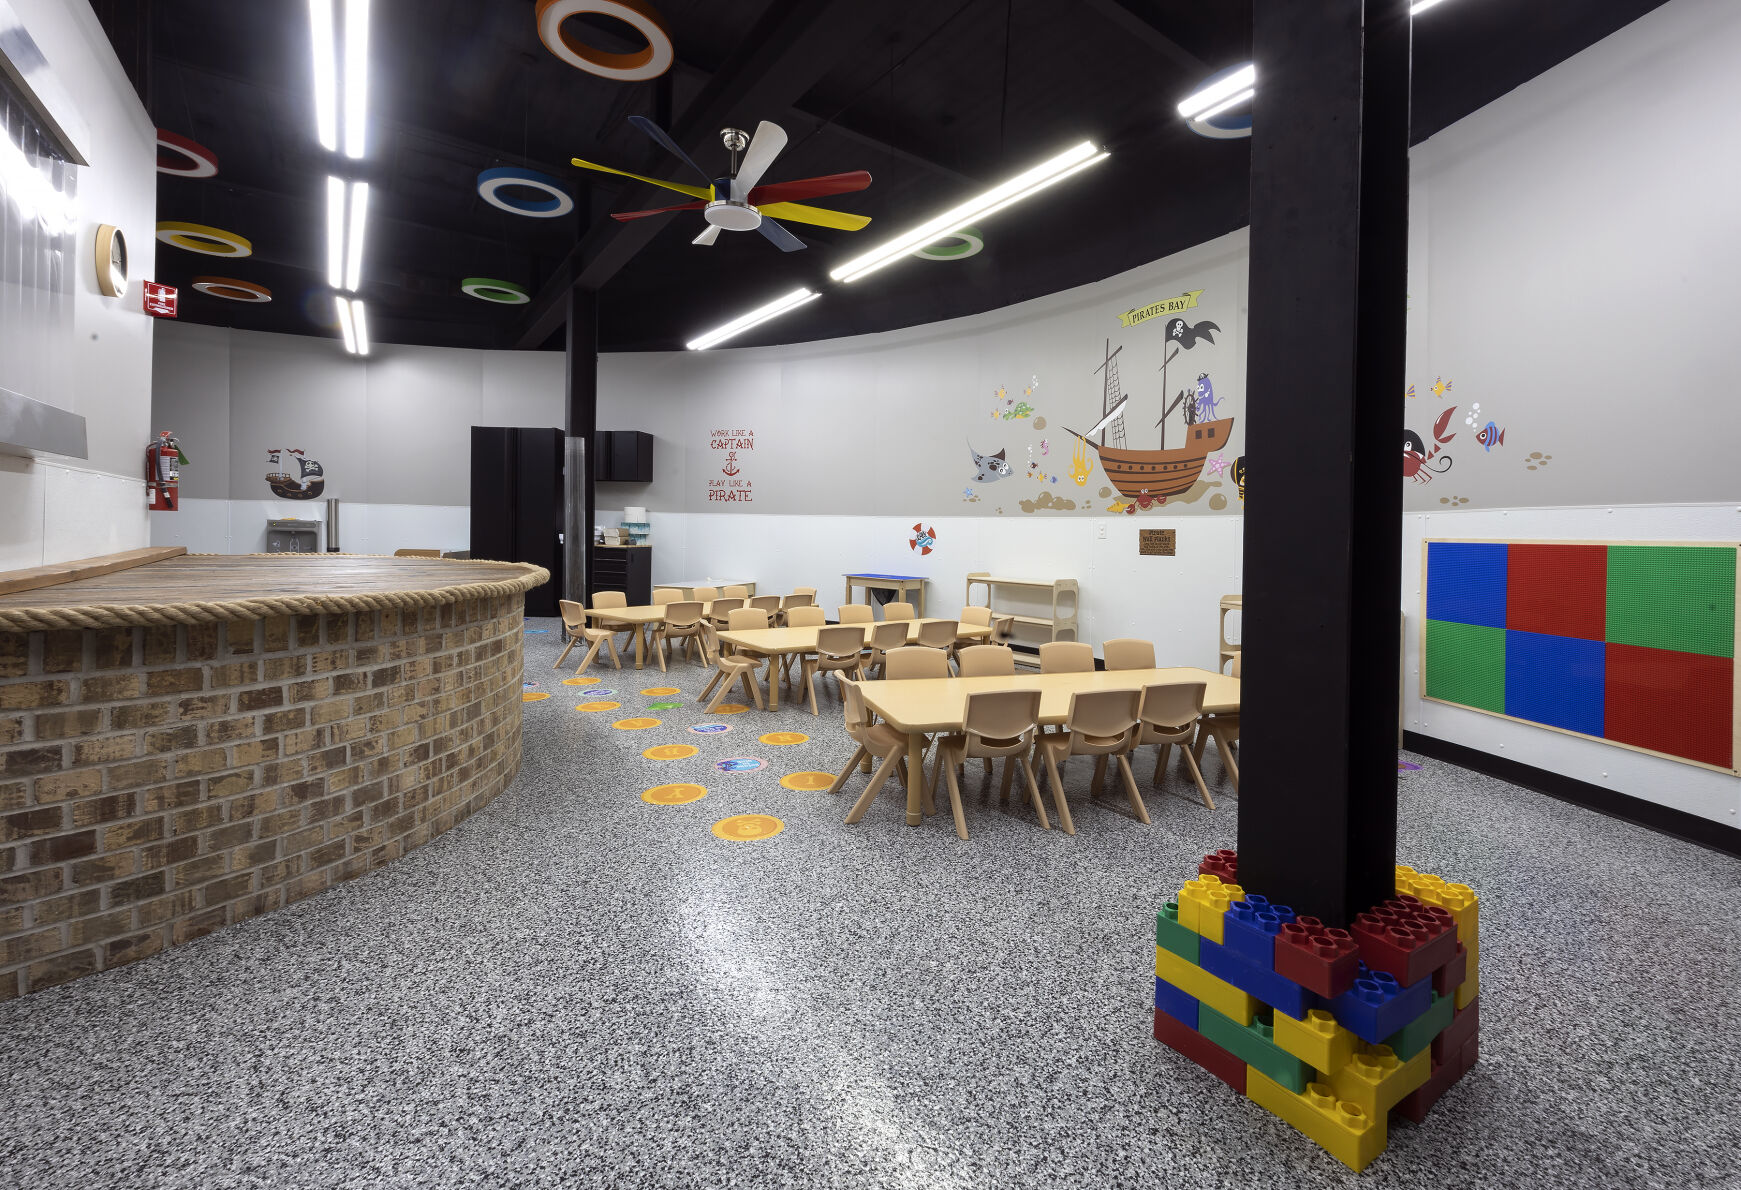 A pirate thymed room at the new Romper Room Childcare Center on Main Street in Dubuque on Friday, Oct. 21, 2022.    PHOTO CREDIT: Stephen Gassman